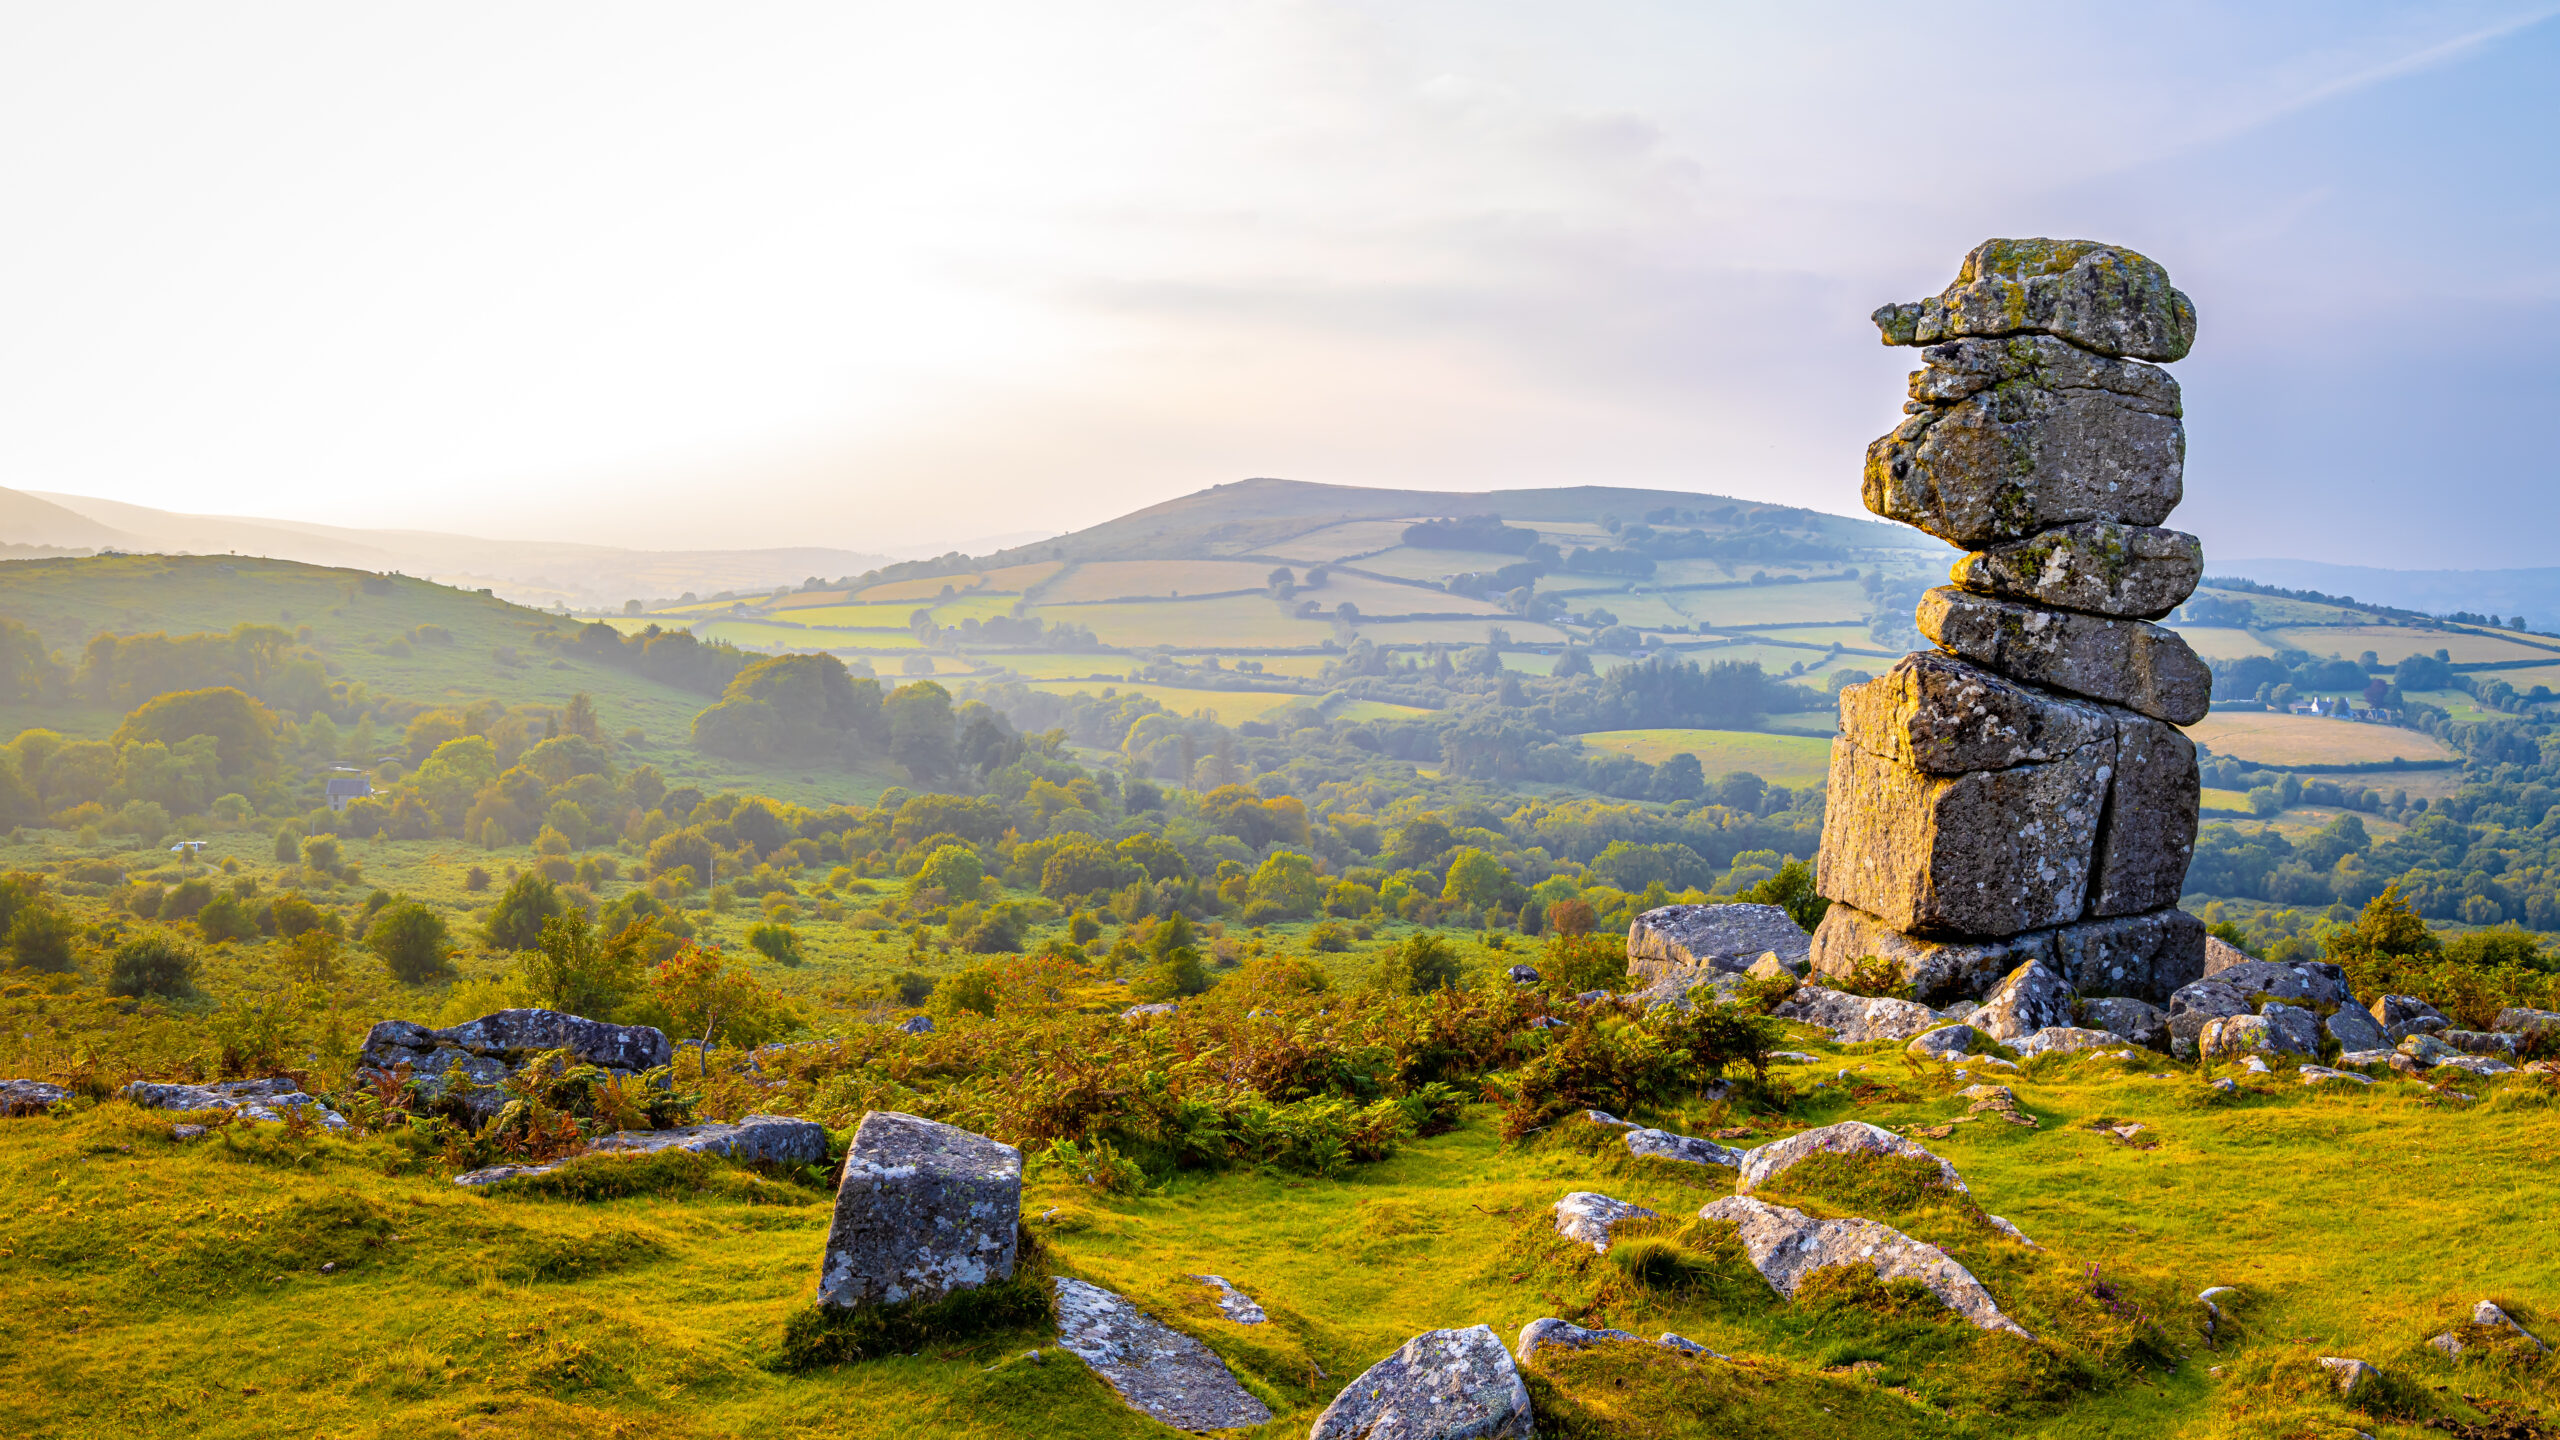 A view of Bowerman's nose, a stone tower overlooking green trees and hills in Dartmoor National Park